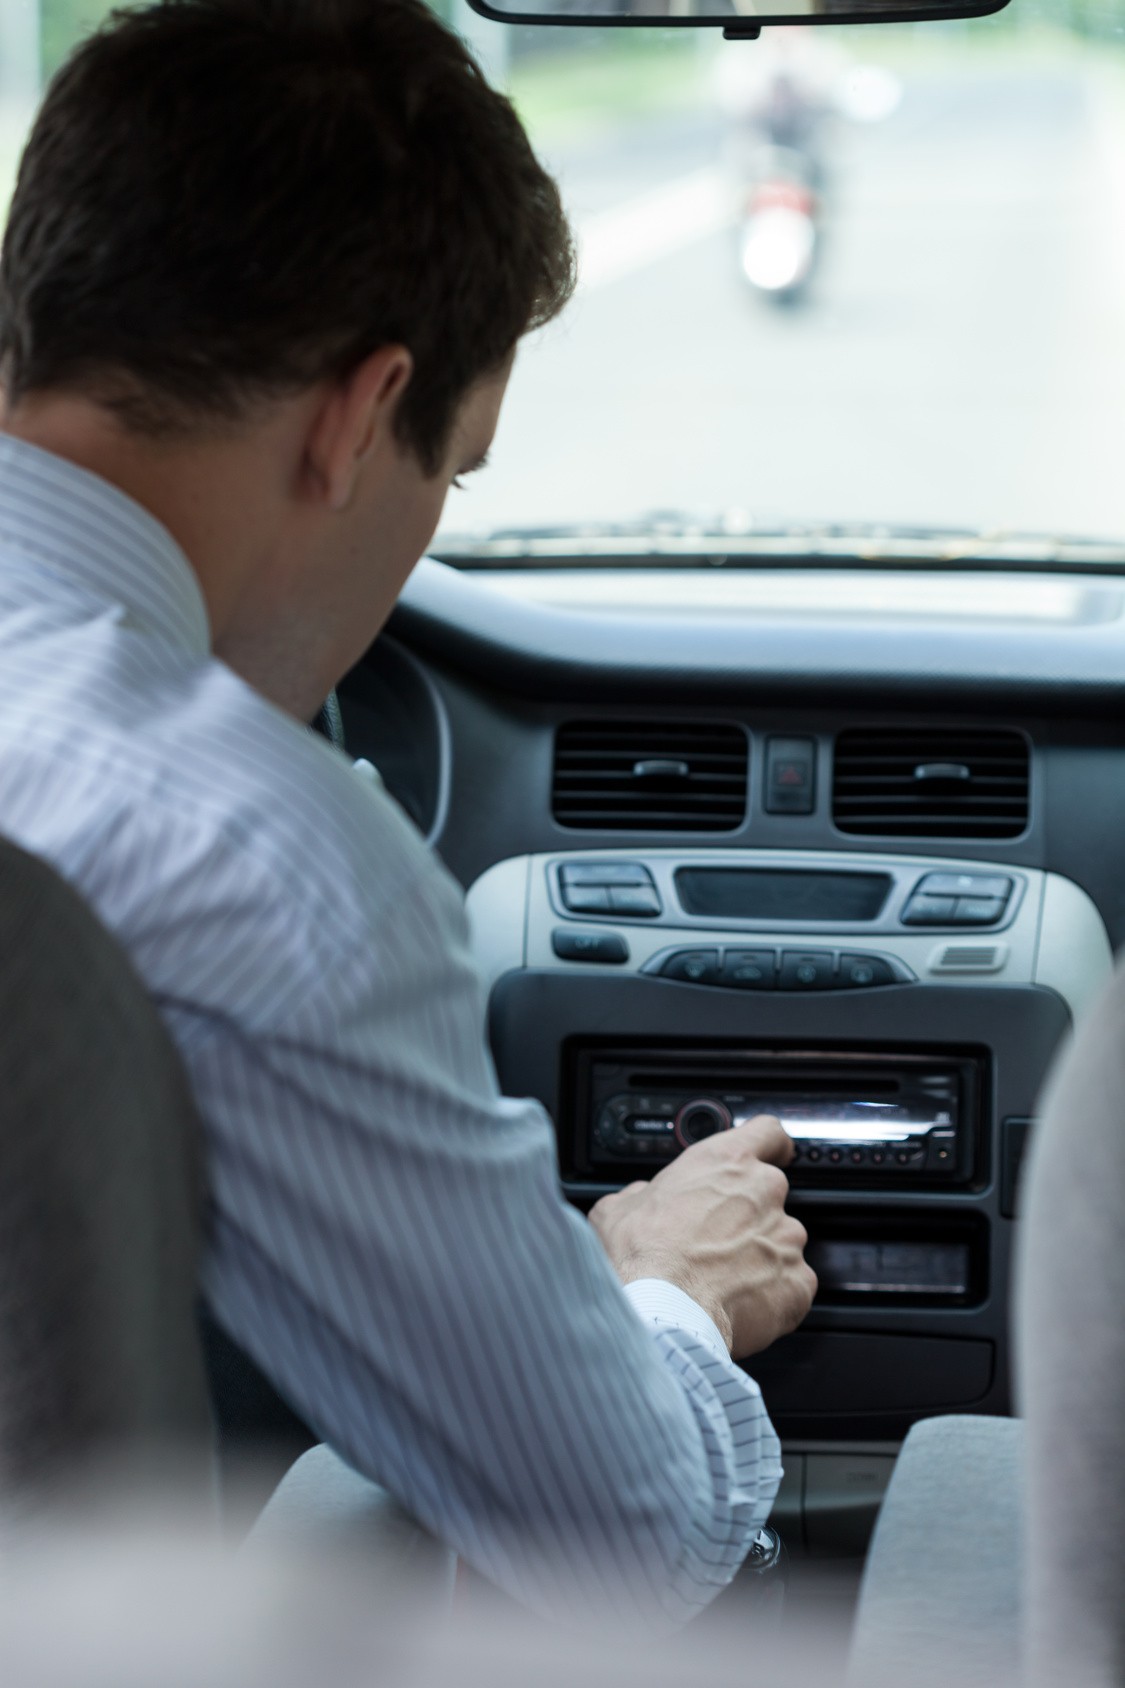 Motor Vehicle Accidents from Distracted Driving